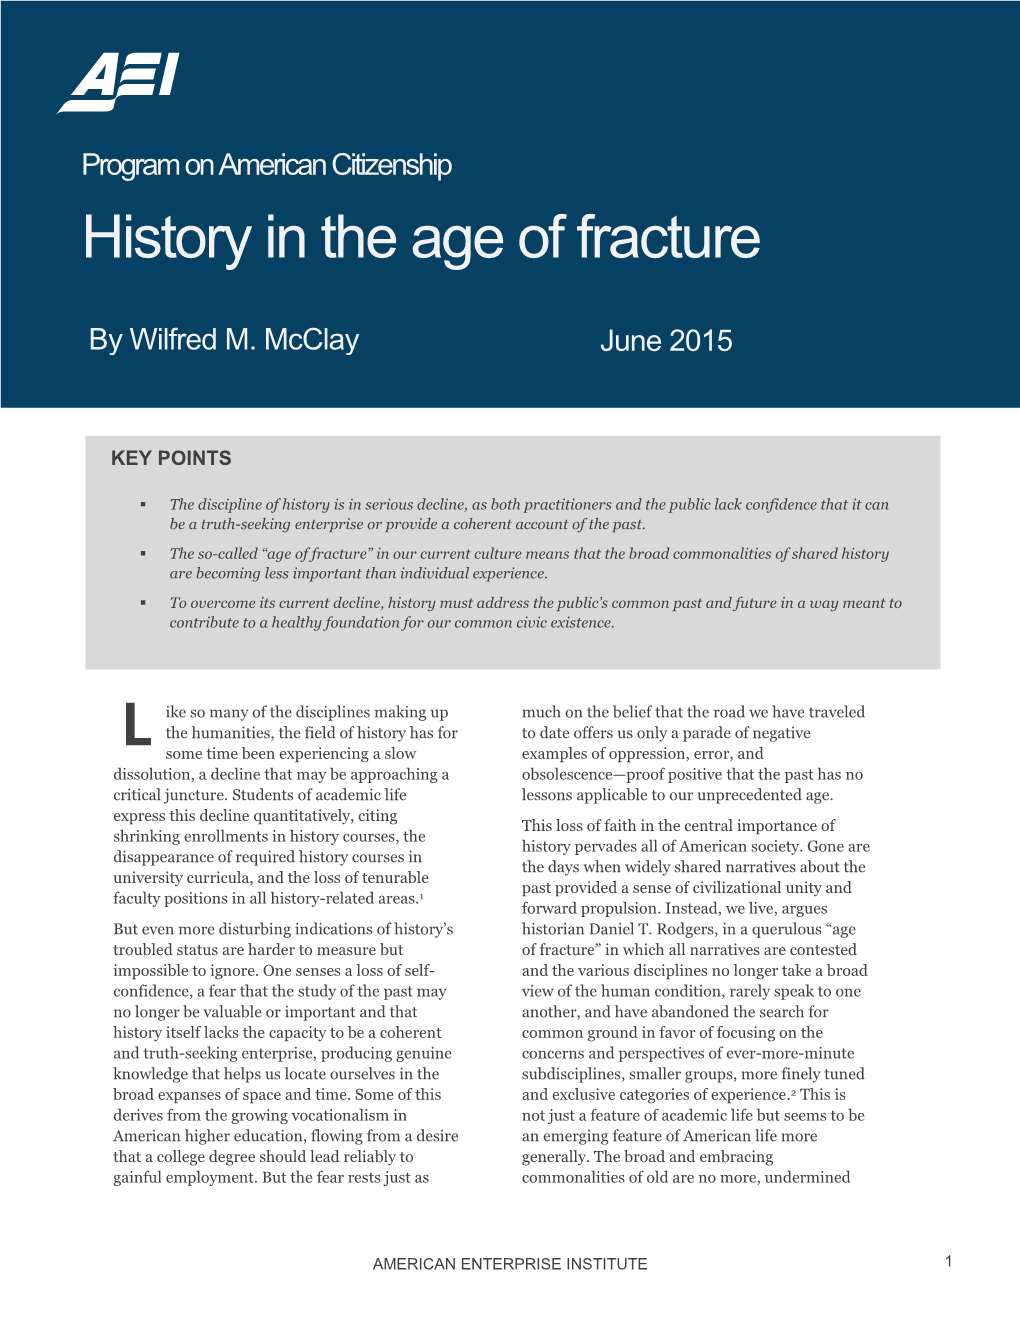 History in the Age of Fracture L